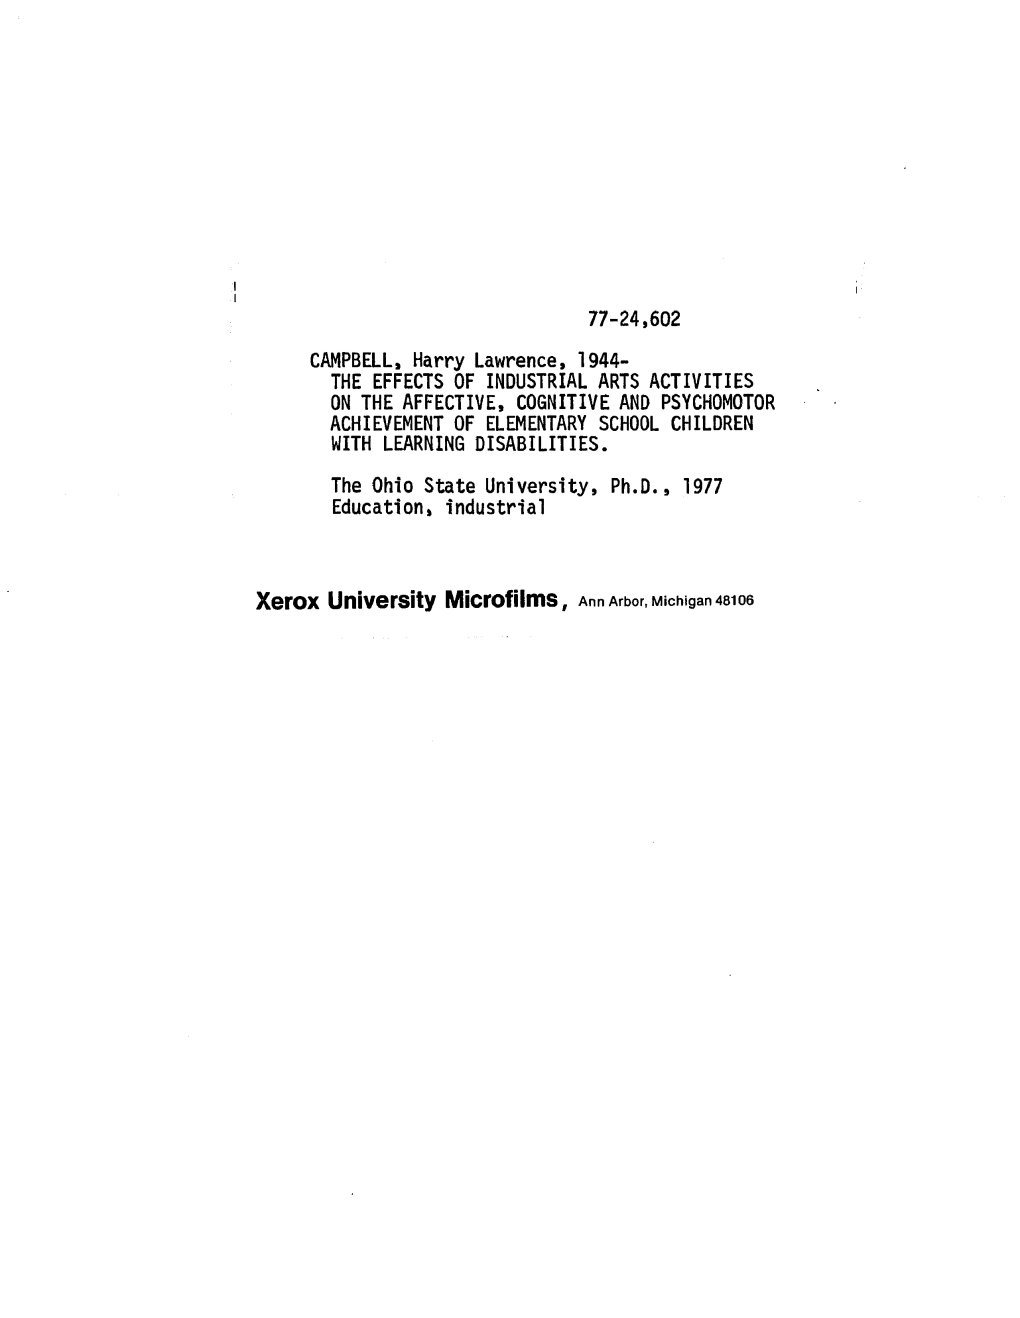 Xerox University Microfilms, Ann Arbor, Michigan 48106 the EFFECTS of INDUSTRIAL ARTS ACTIVITIES on THE